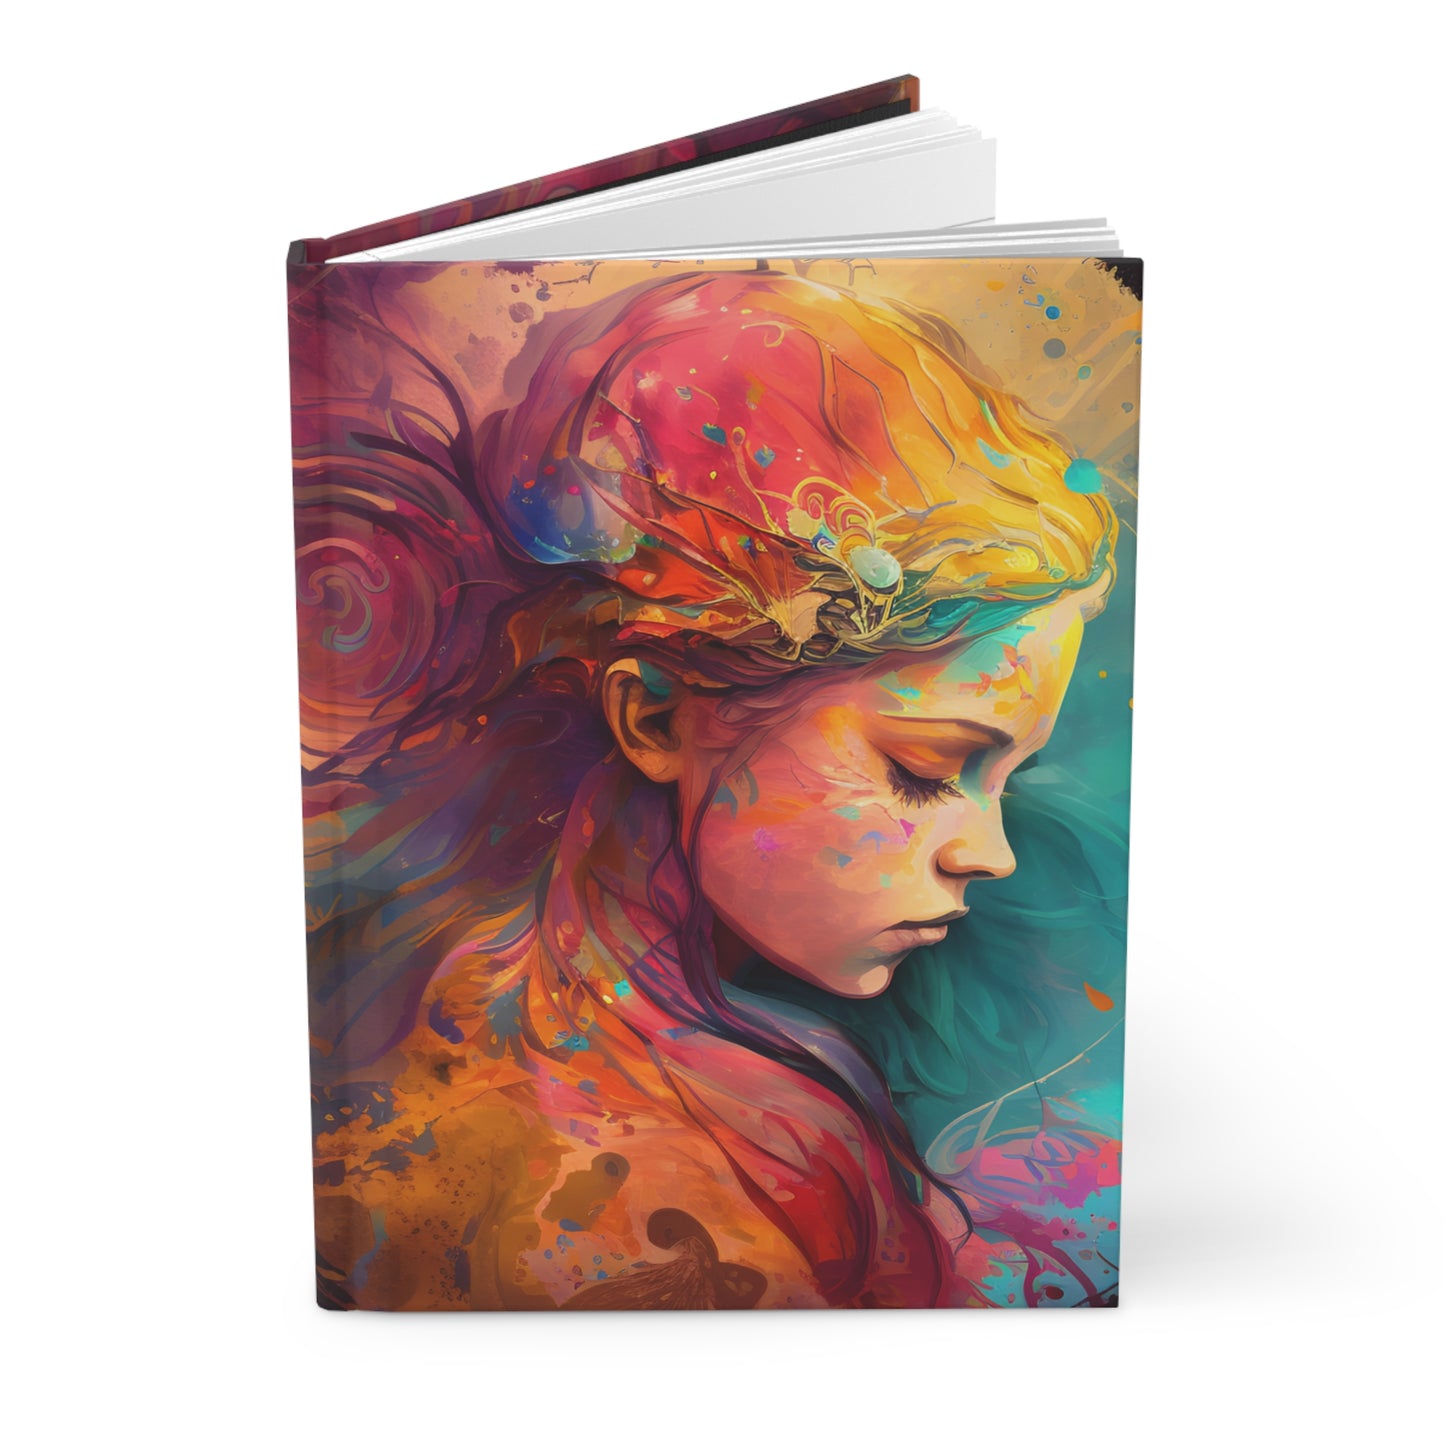 Virgo the Artist with Poem Hardcover 150 Page Journal